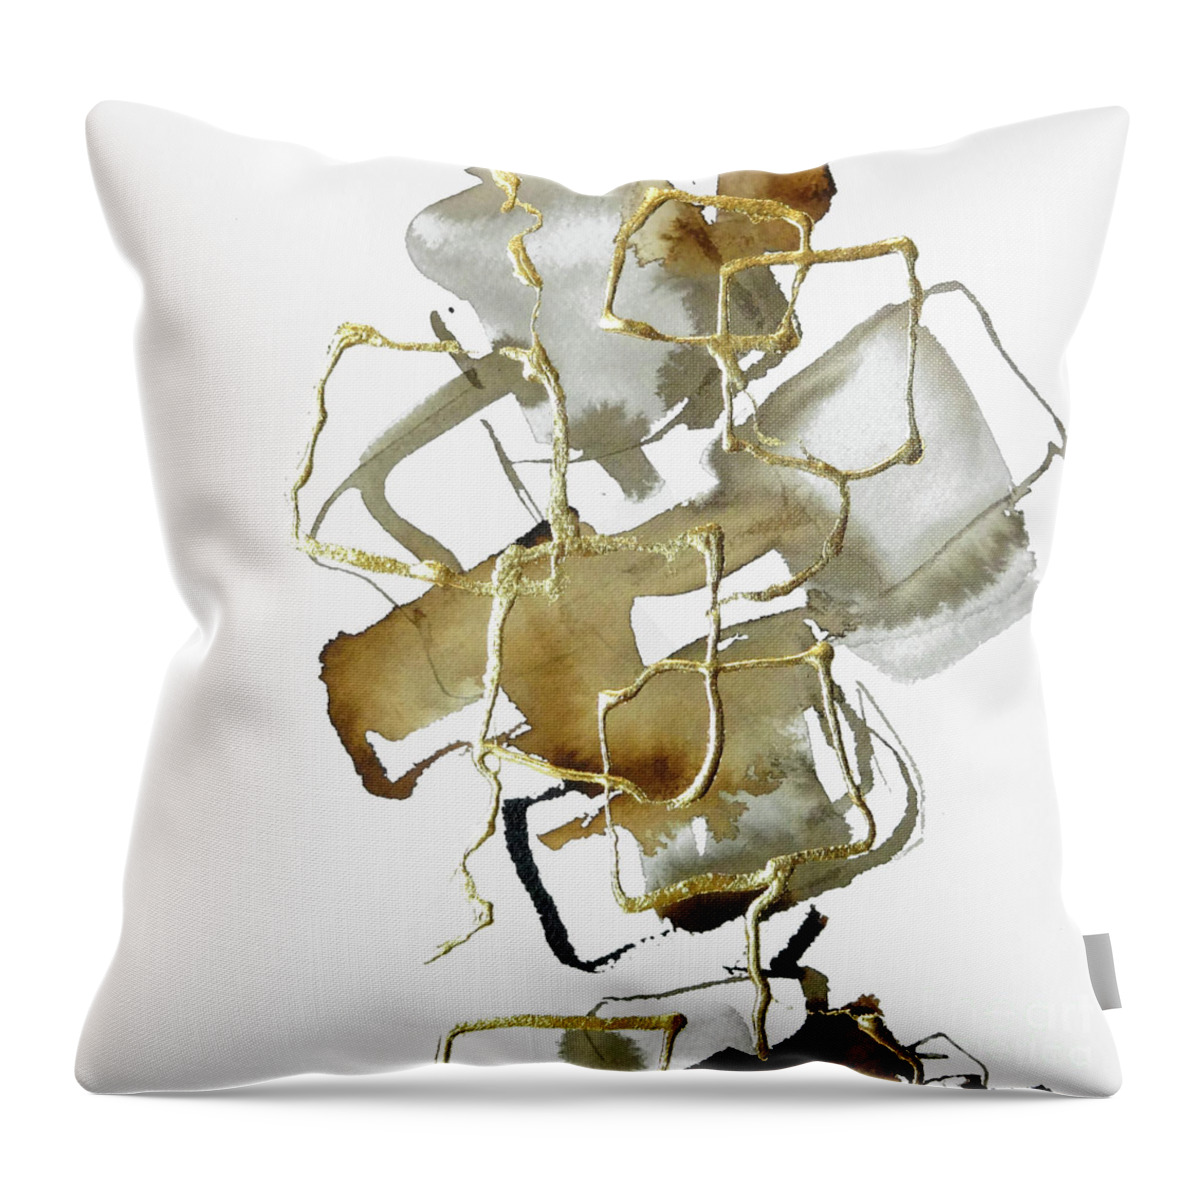 Original Watercolors Throw Pillow featuring the painting Gold Squares 1 by Chris Paschke